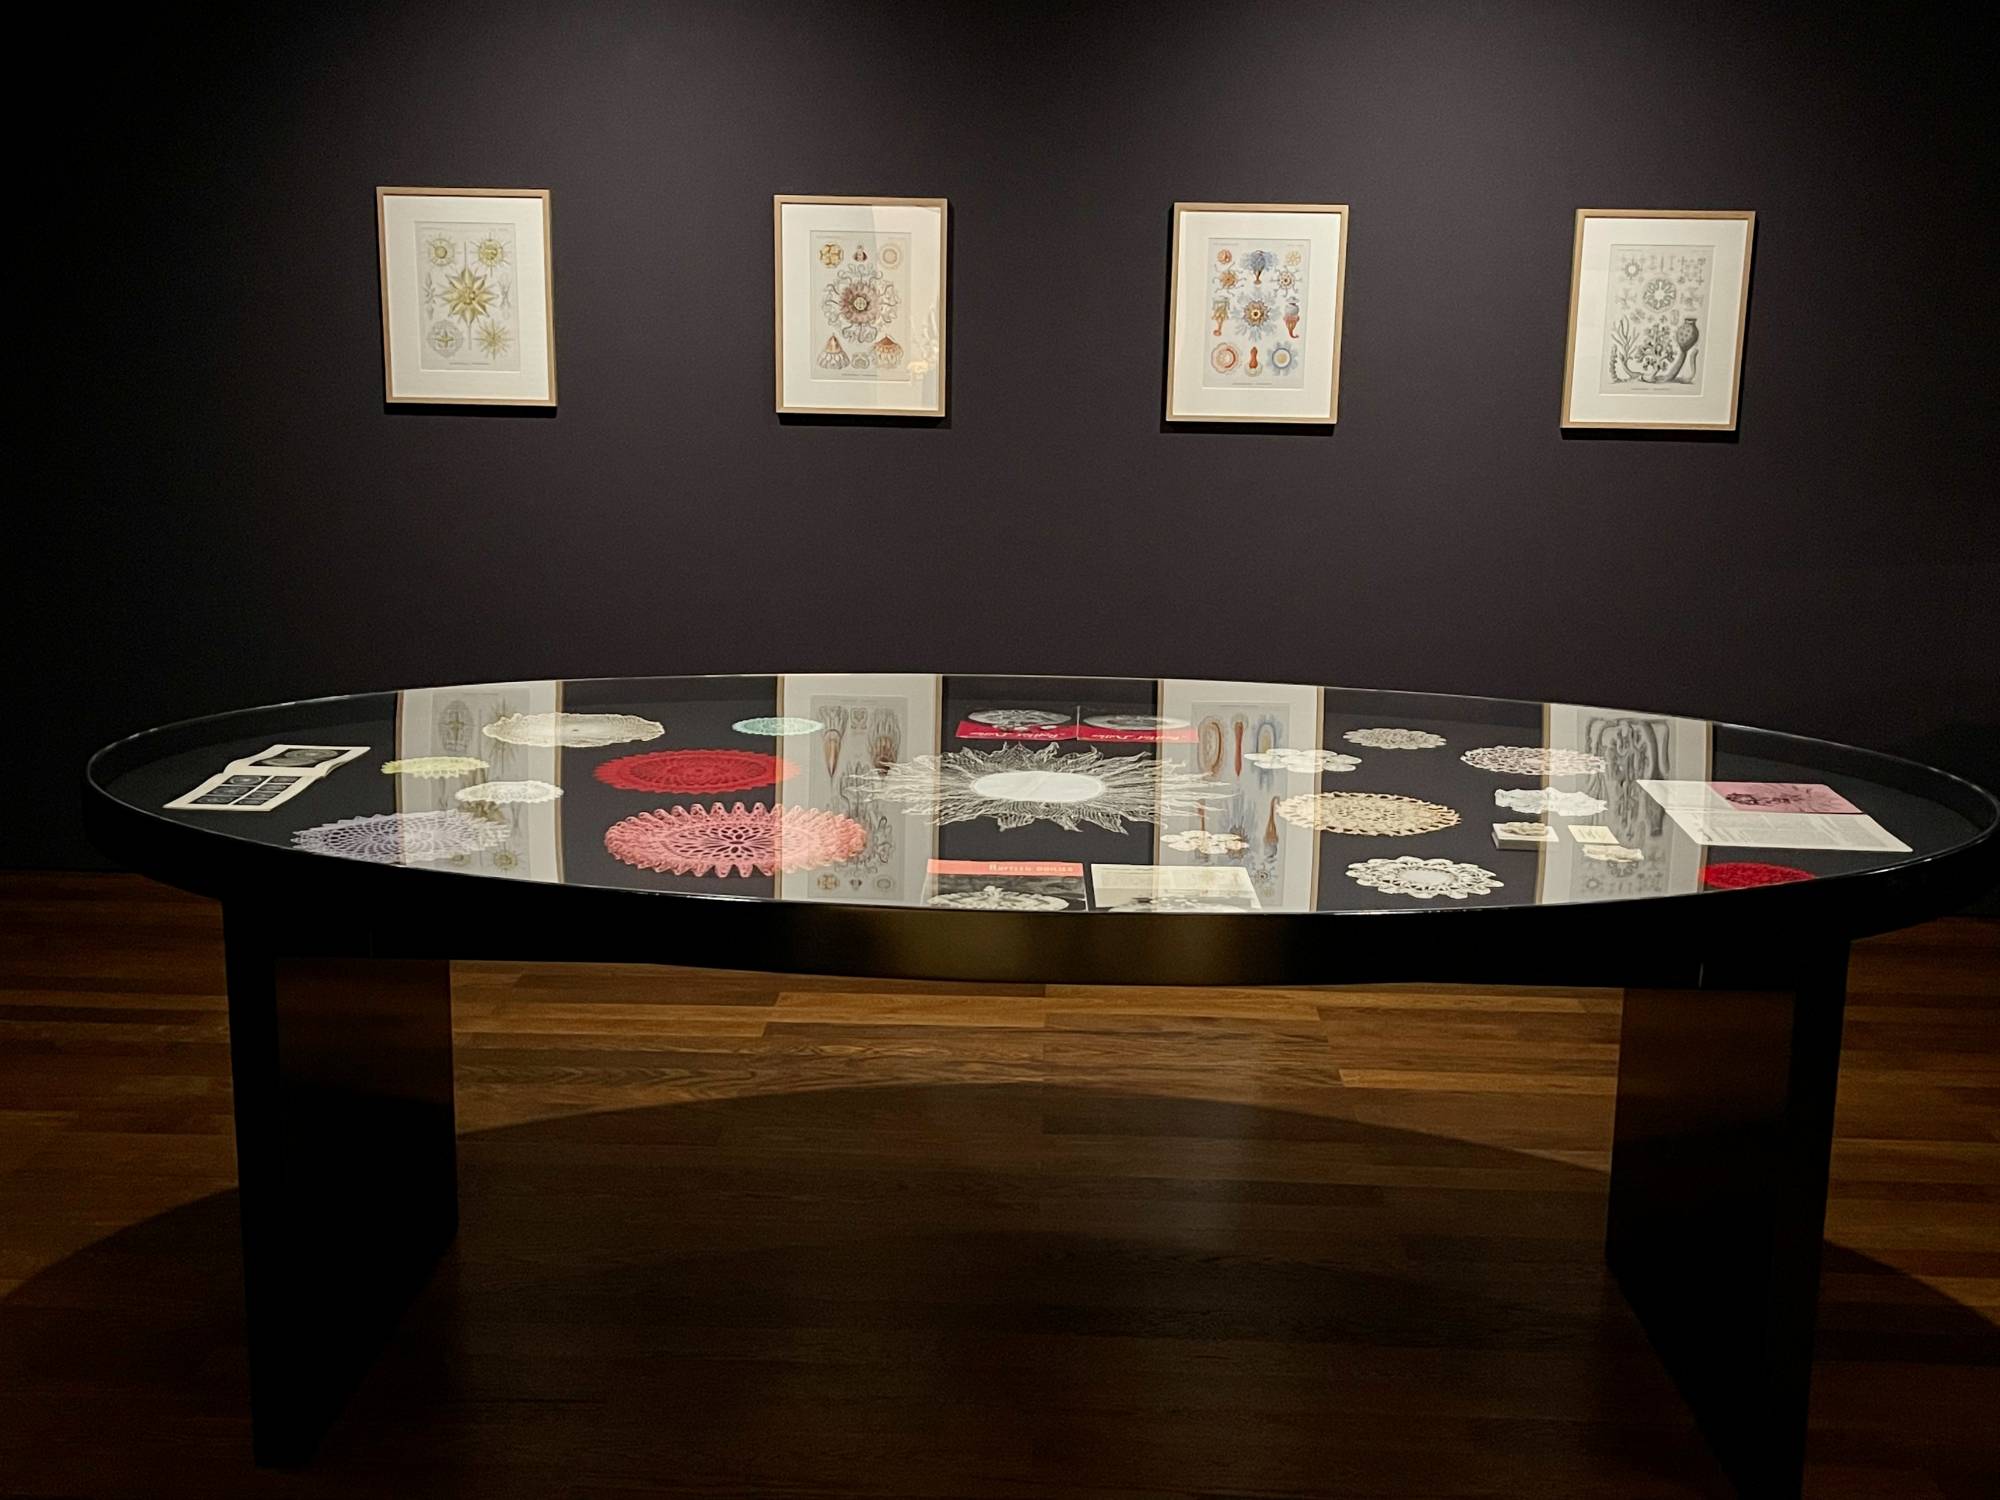 display of vintage coral doilies and prints of Ernst Haeckel sea creature drawings